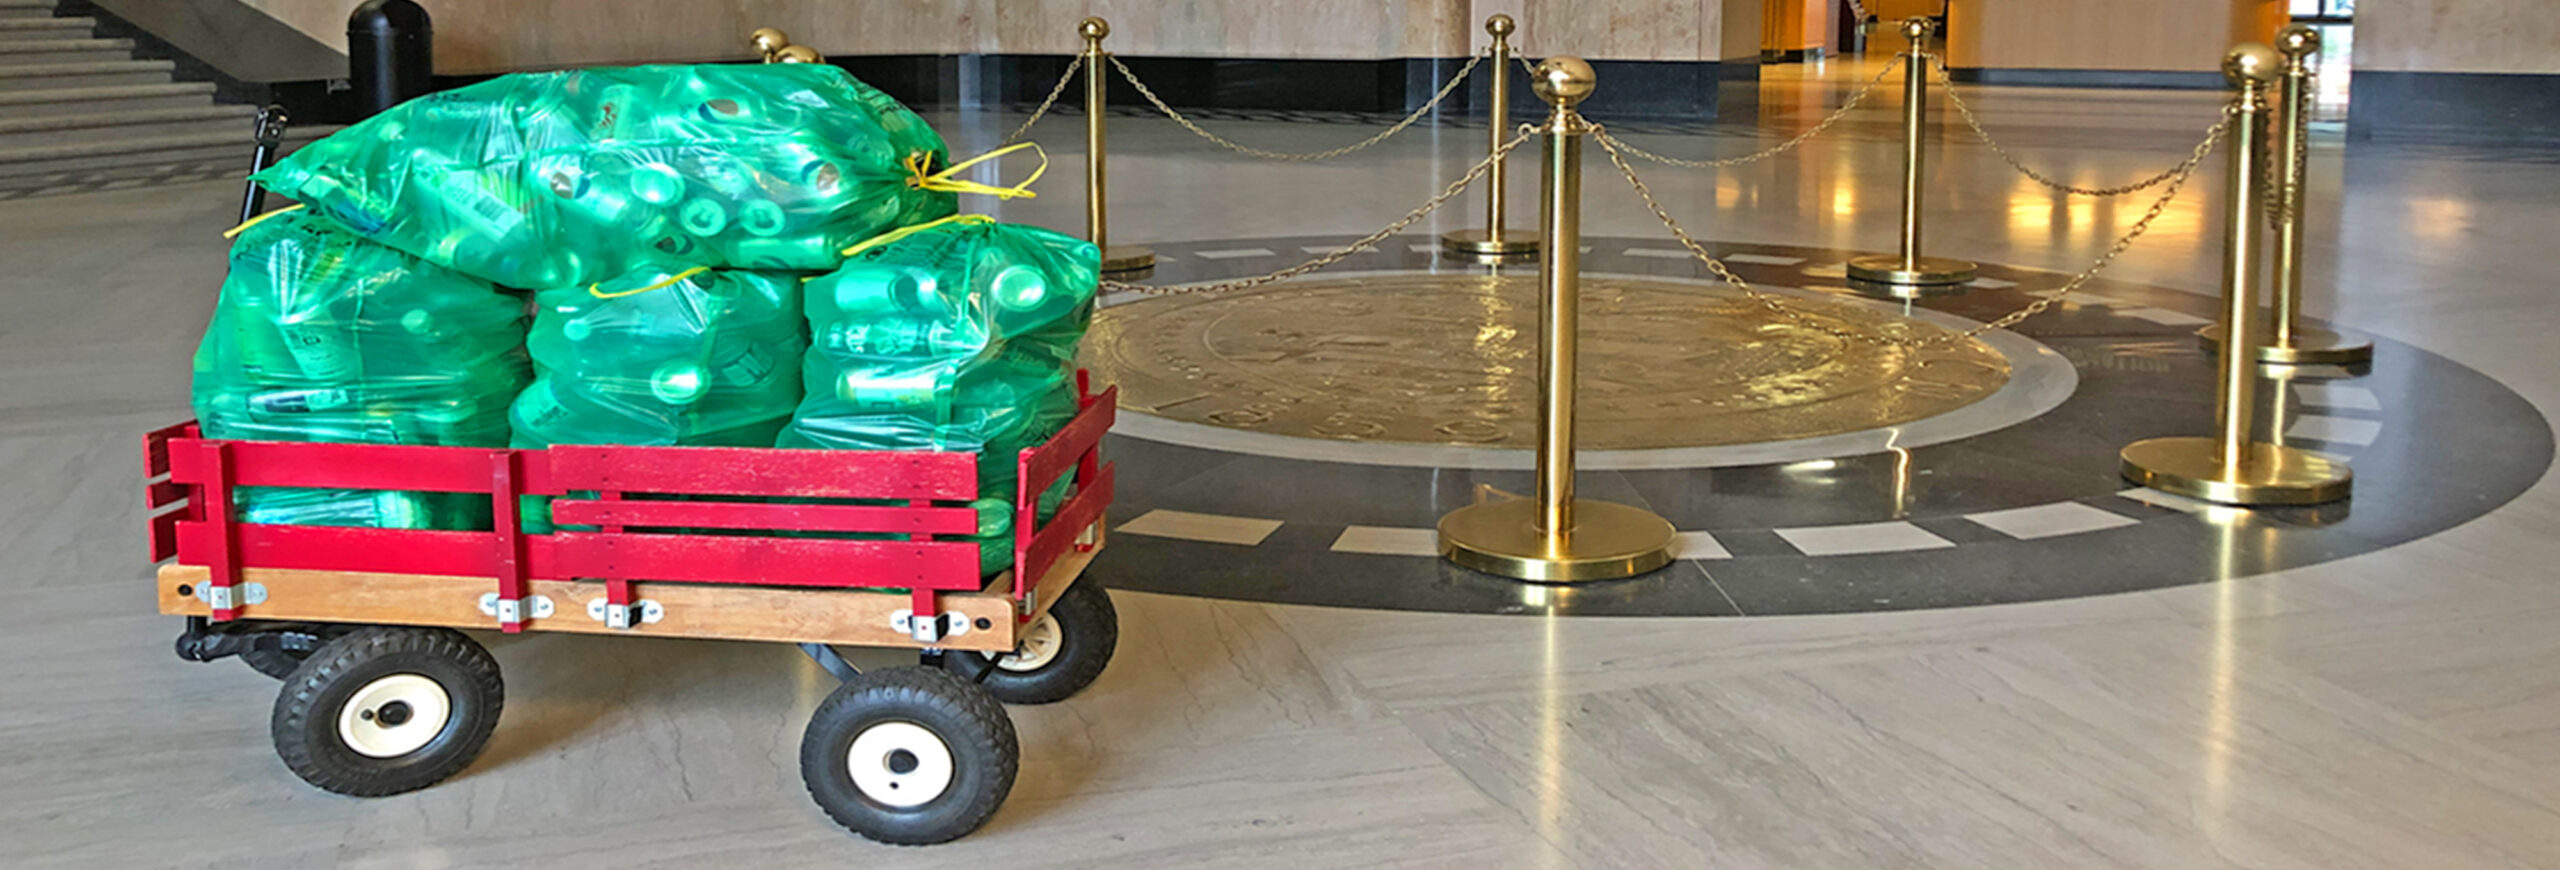 Green bags of recyclable containers in a small red wagon inside the Oregon State Capitol.